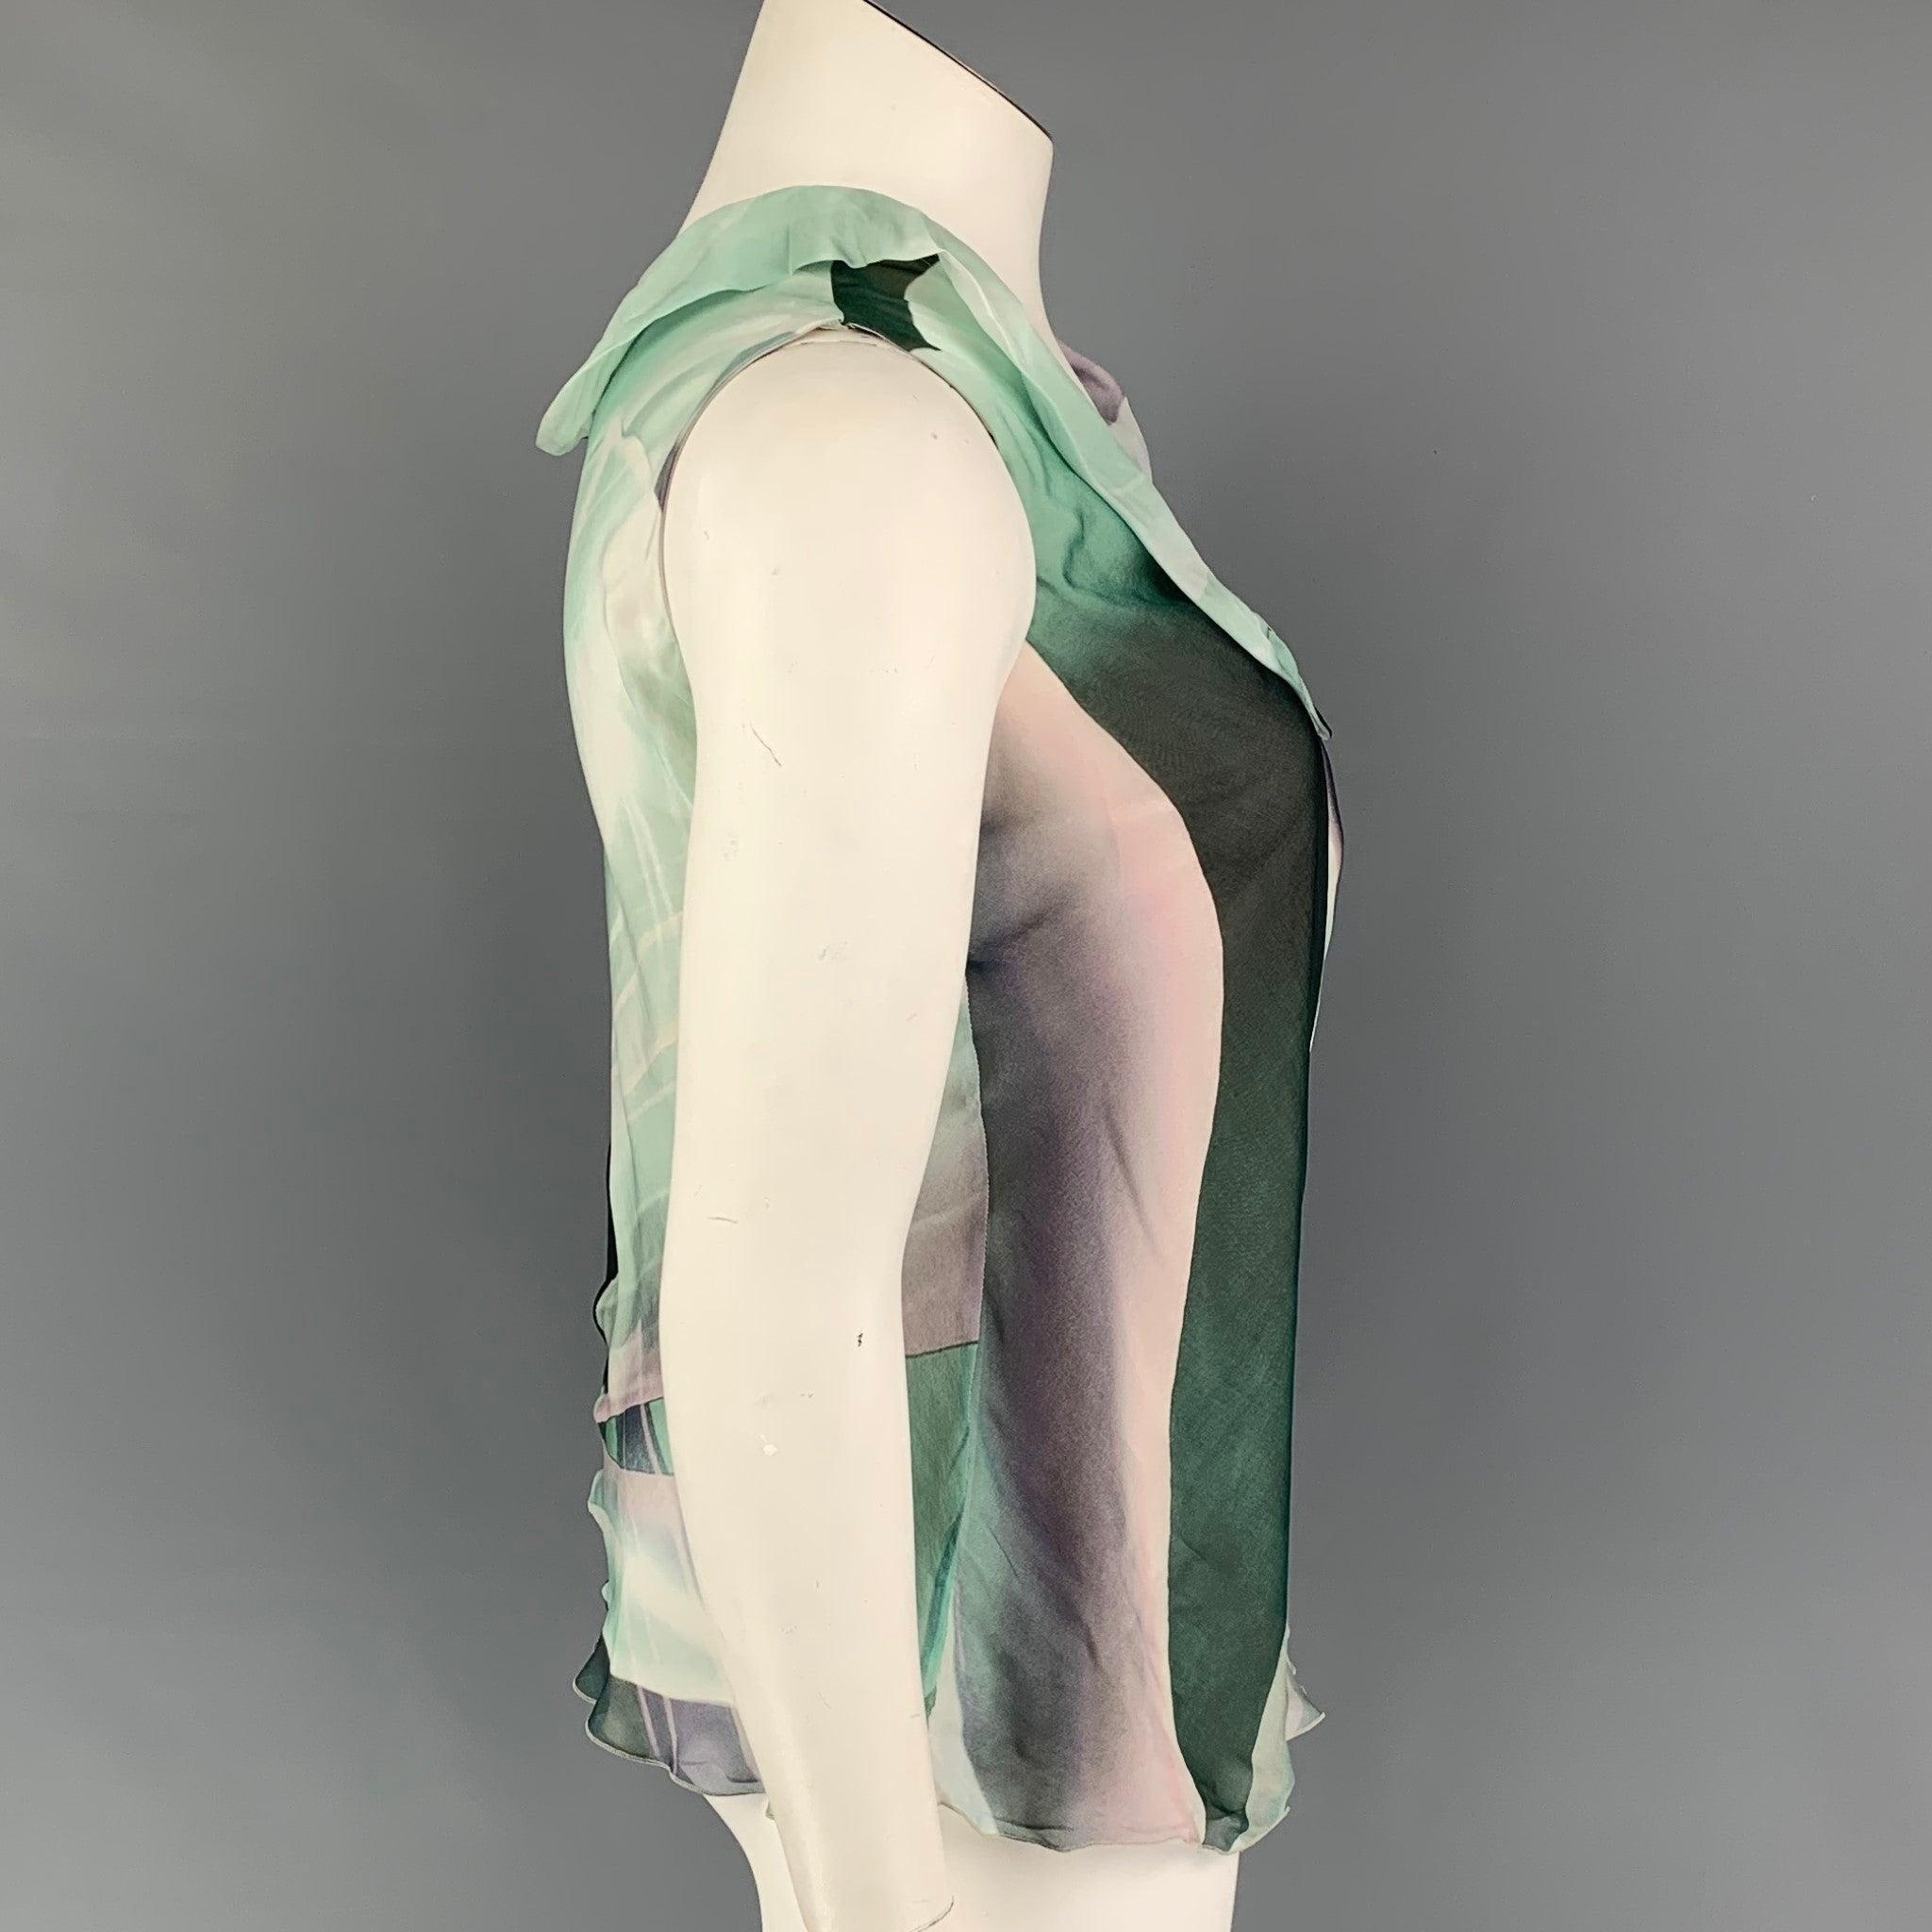 ARMANI COLLEZIONI top comes in a green & purple marbled silk featuring a ruffled hem, sleeveless, and a deep neckline. Made in Italy.
Very Good
Pre-Owned Condition. 

Marked:   8 

Measurements: 
 
Shoulder: 15 inches  Bust: 34 inches  Length:
22.5